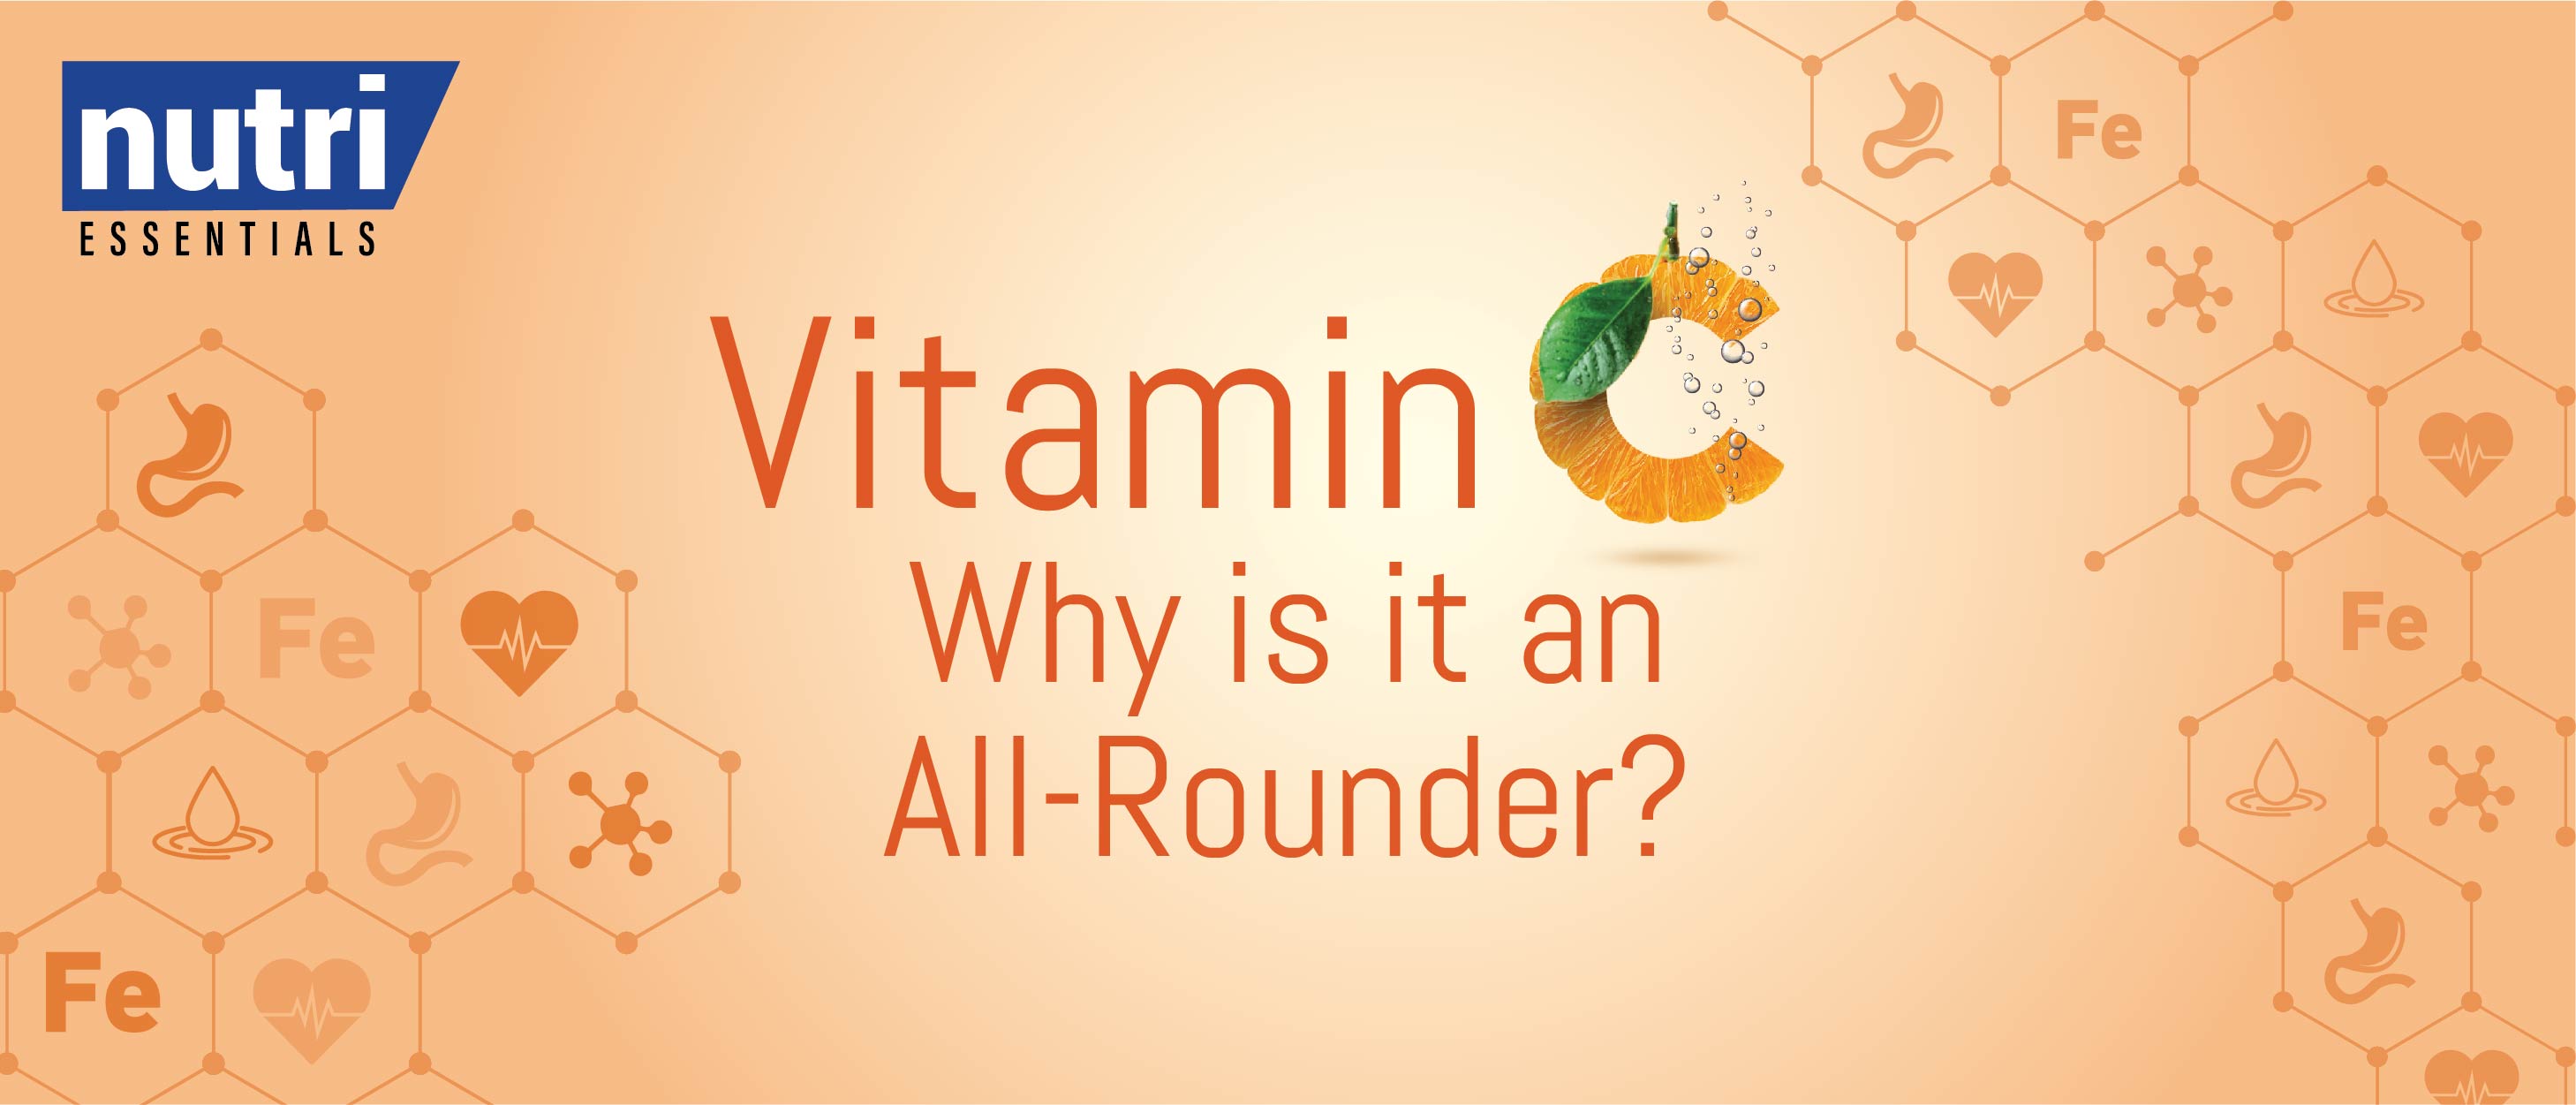 Vitamin C- Why is it an All-Rounder?